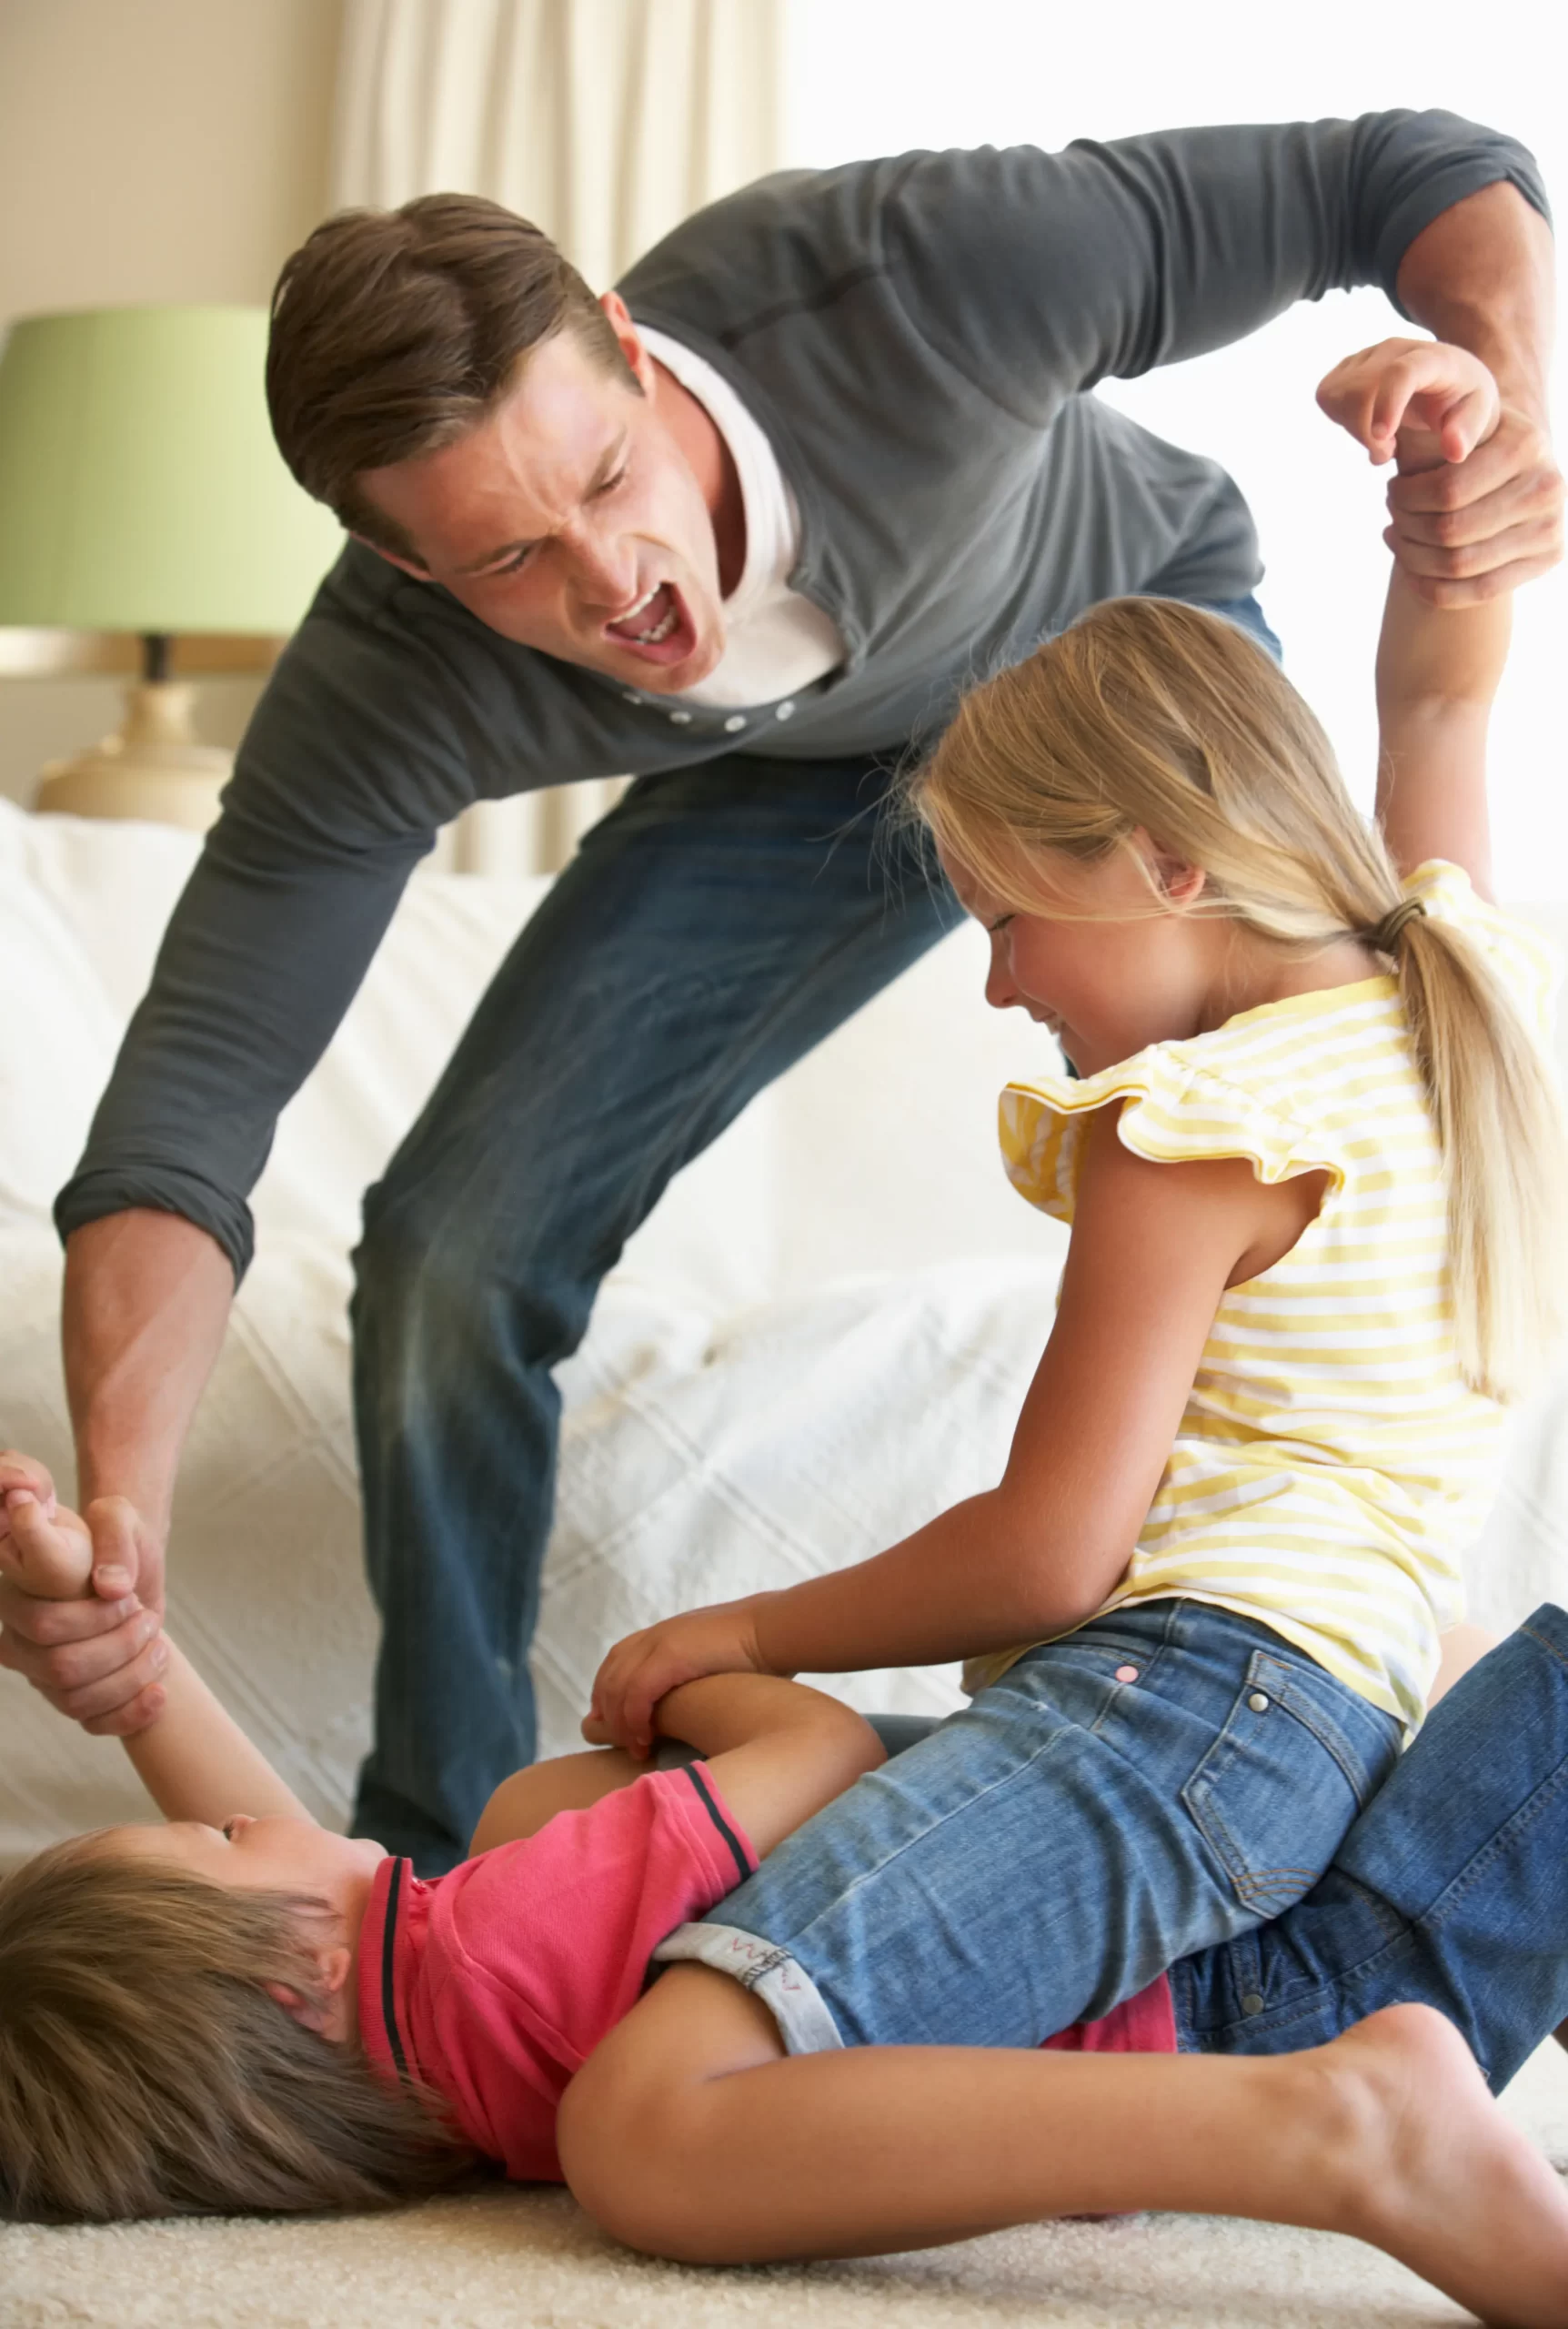 When Does A Parent Need To Intervene